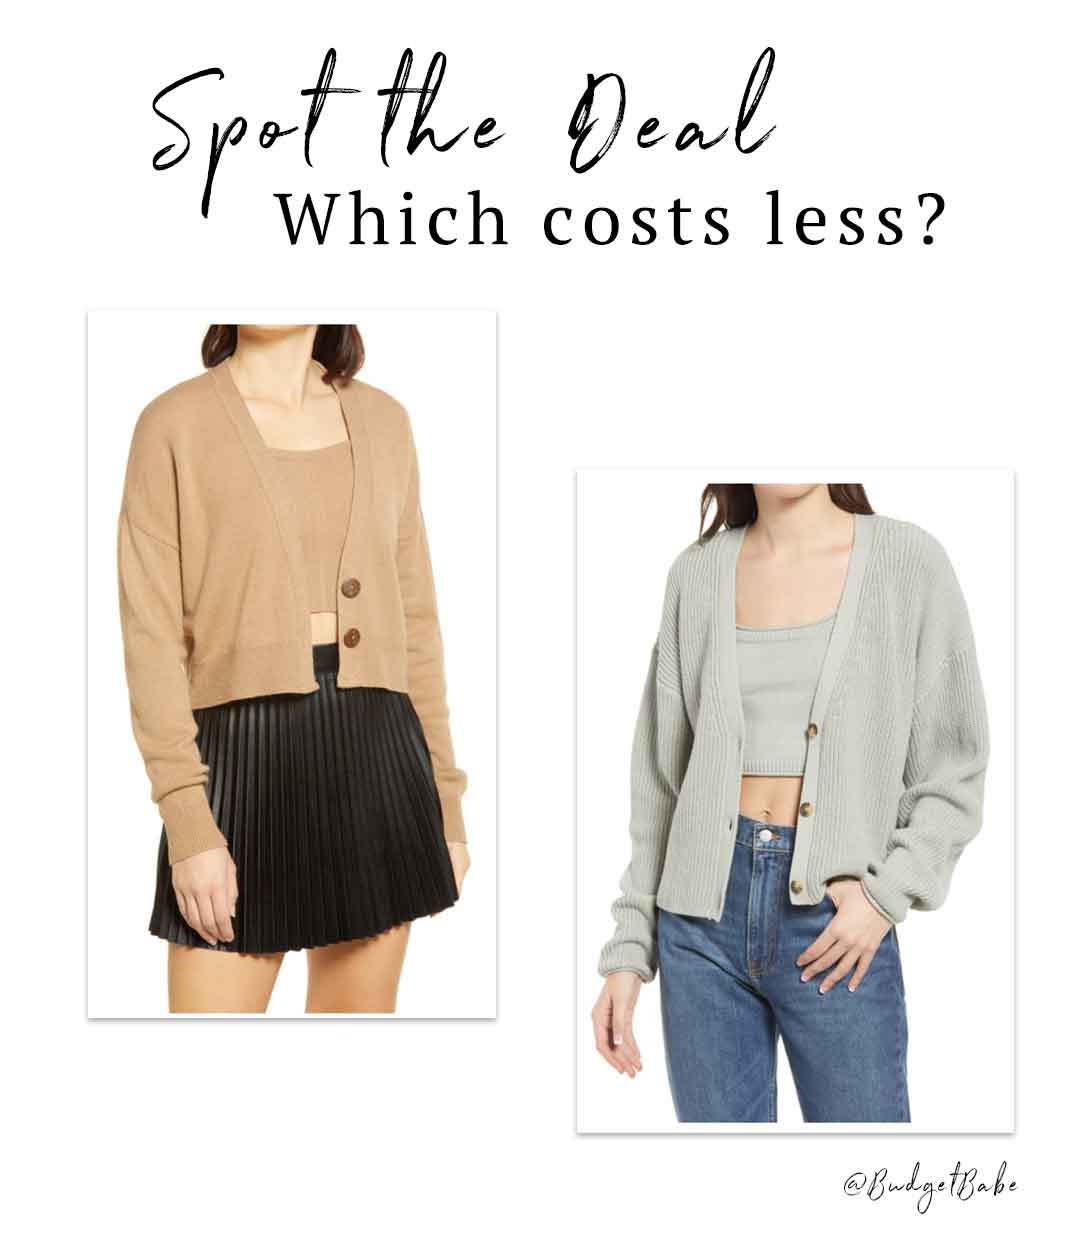 Can you guess which sweater set costs less?